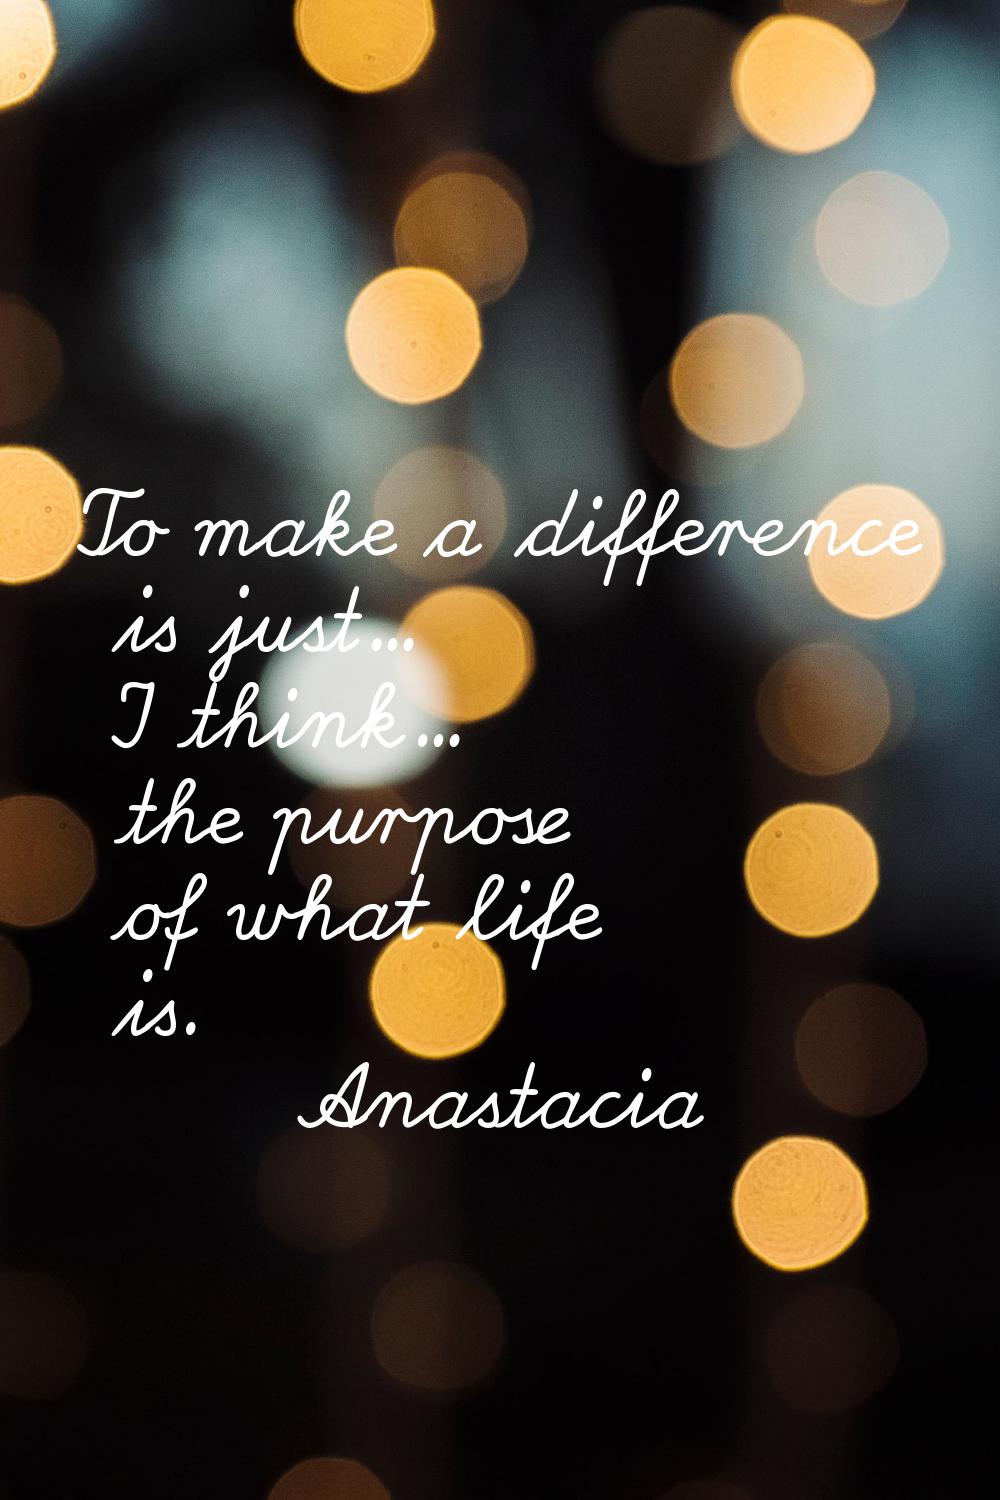 To make a difference is just... I think... the purpose of what life is.